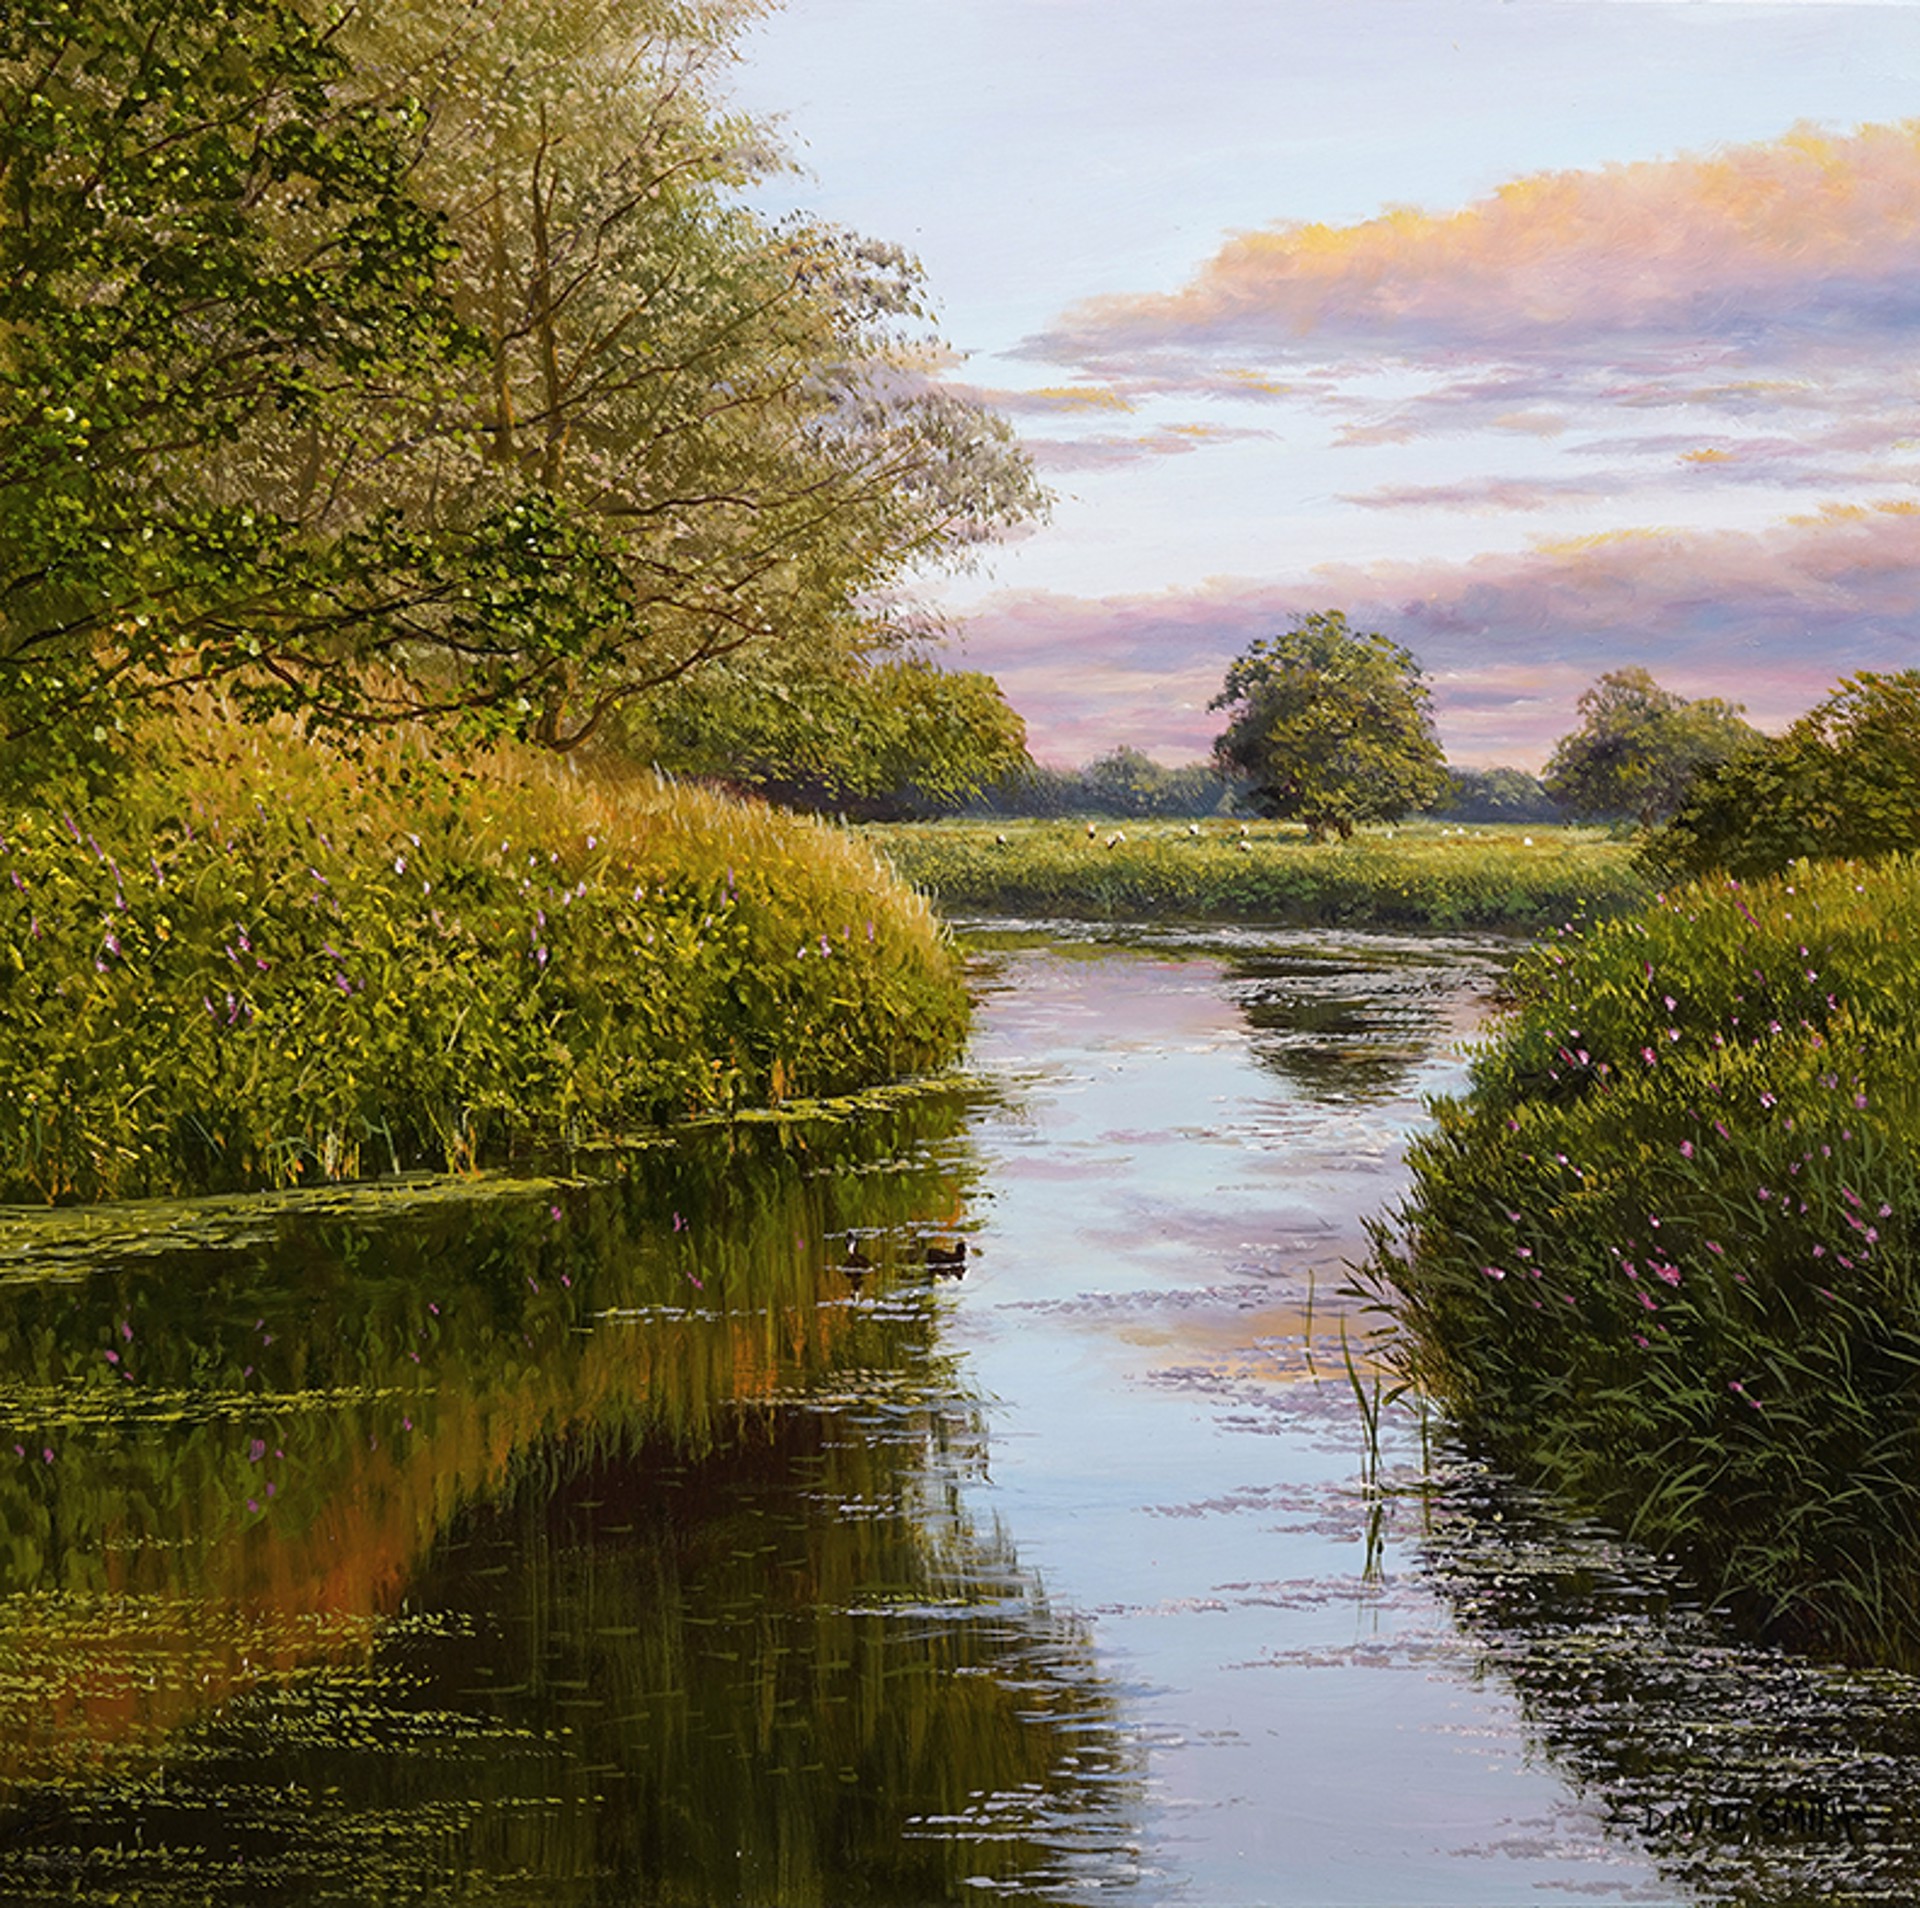 Evening on the River Gipping by David Smith